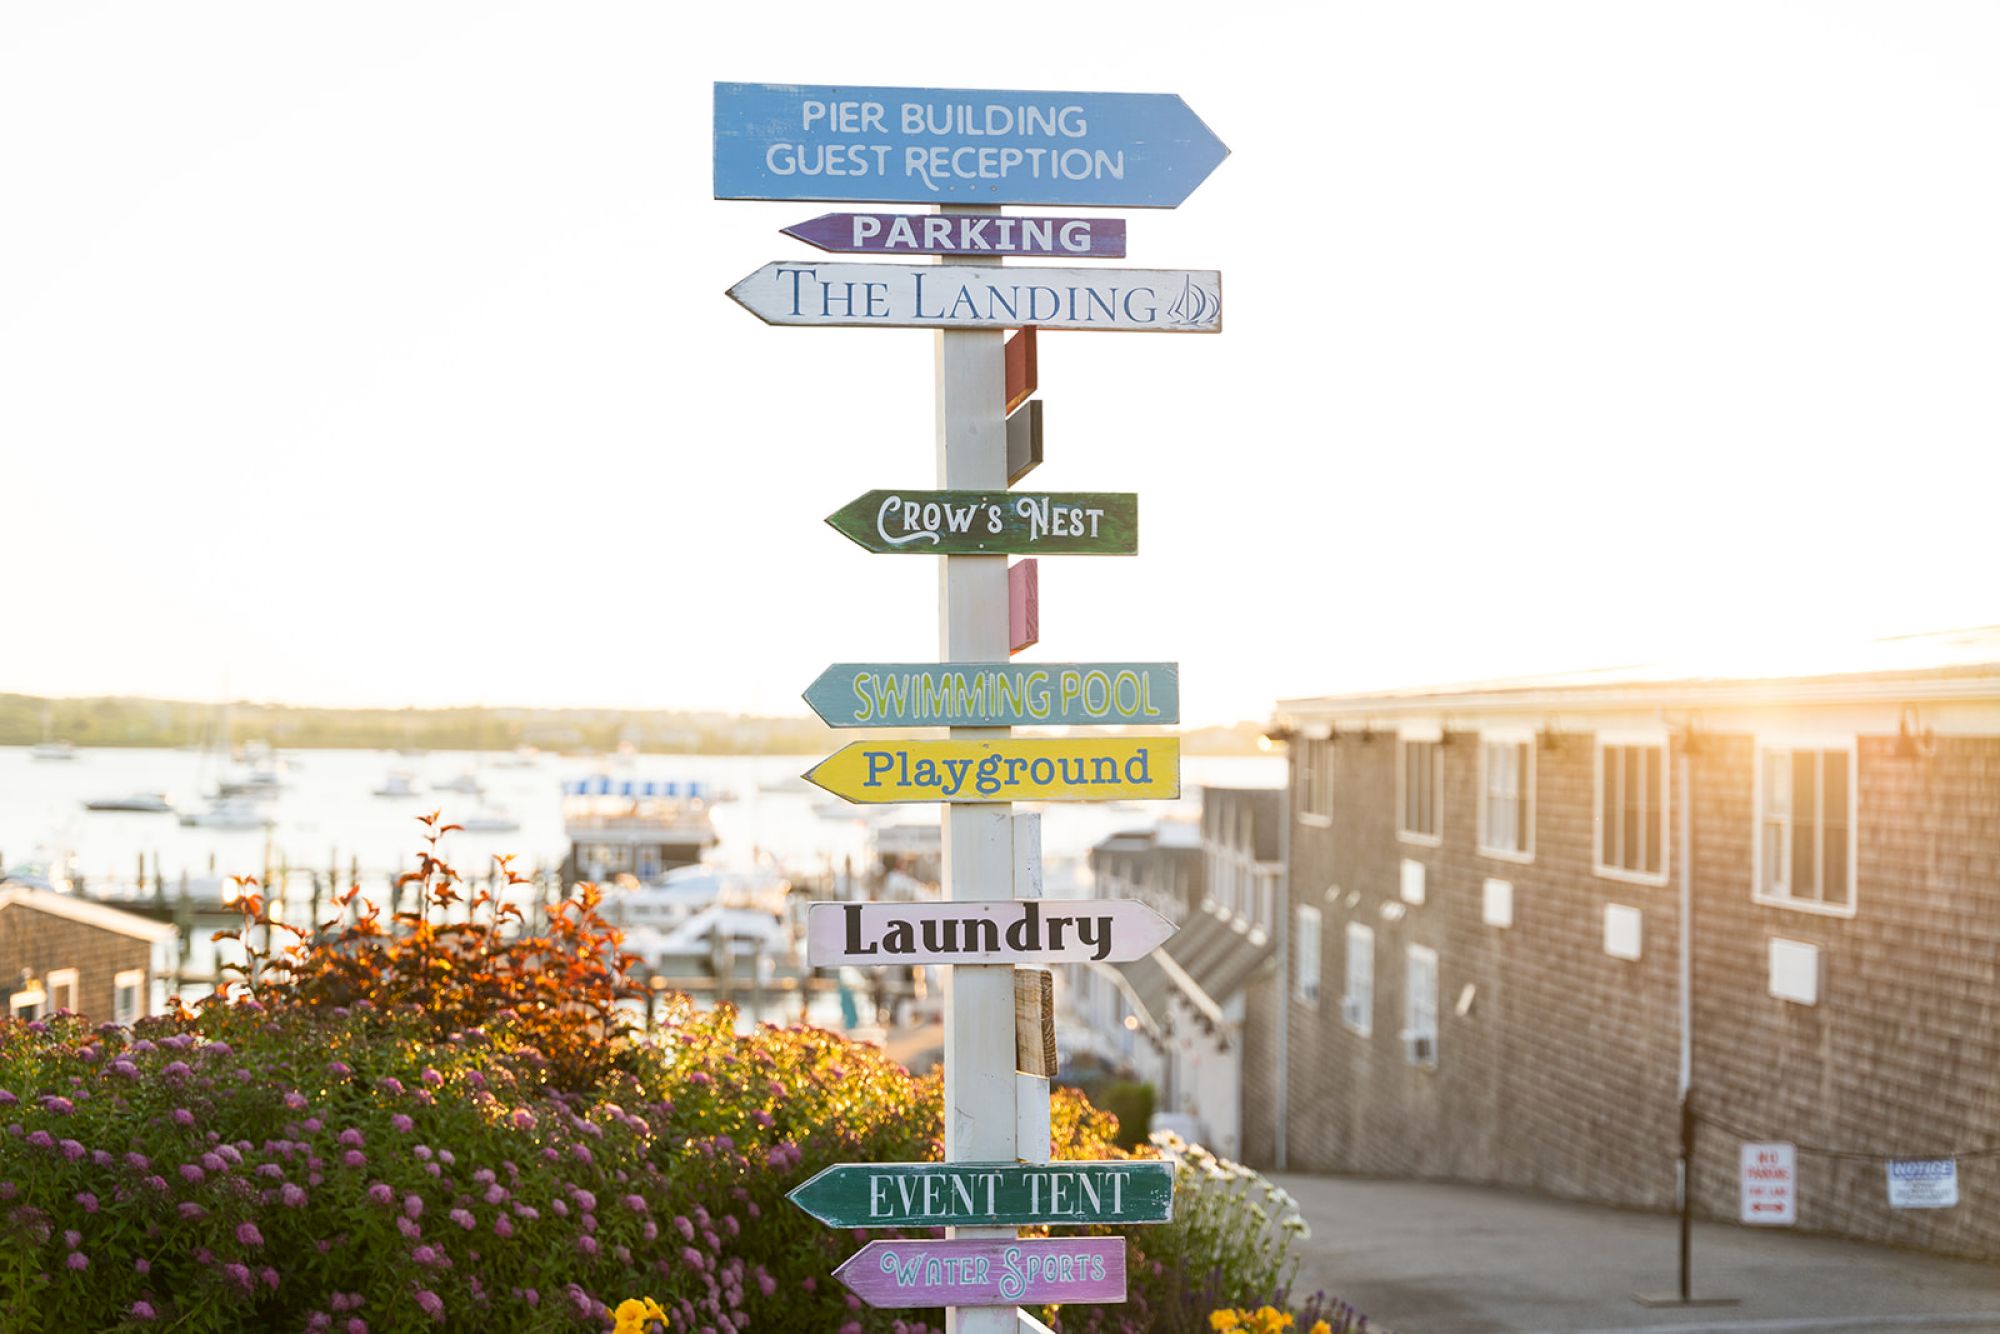 A signpost with multiple colorful directional signs points to various locations like parking, swimming pool, playground, laundry, and event tent.